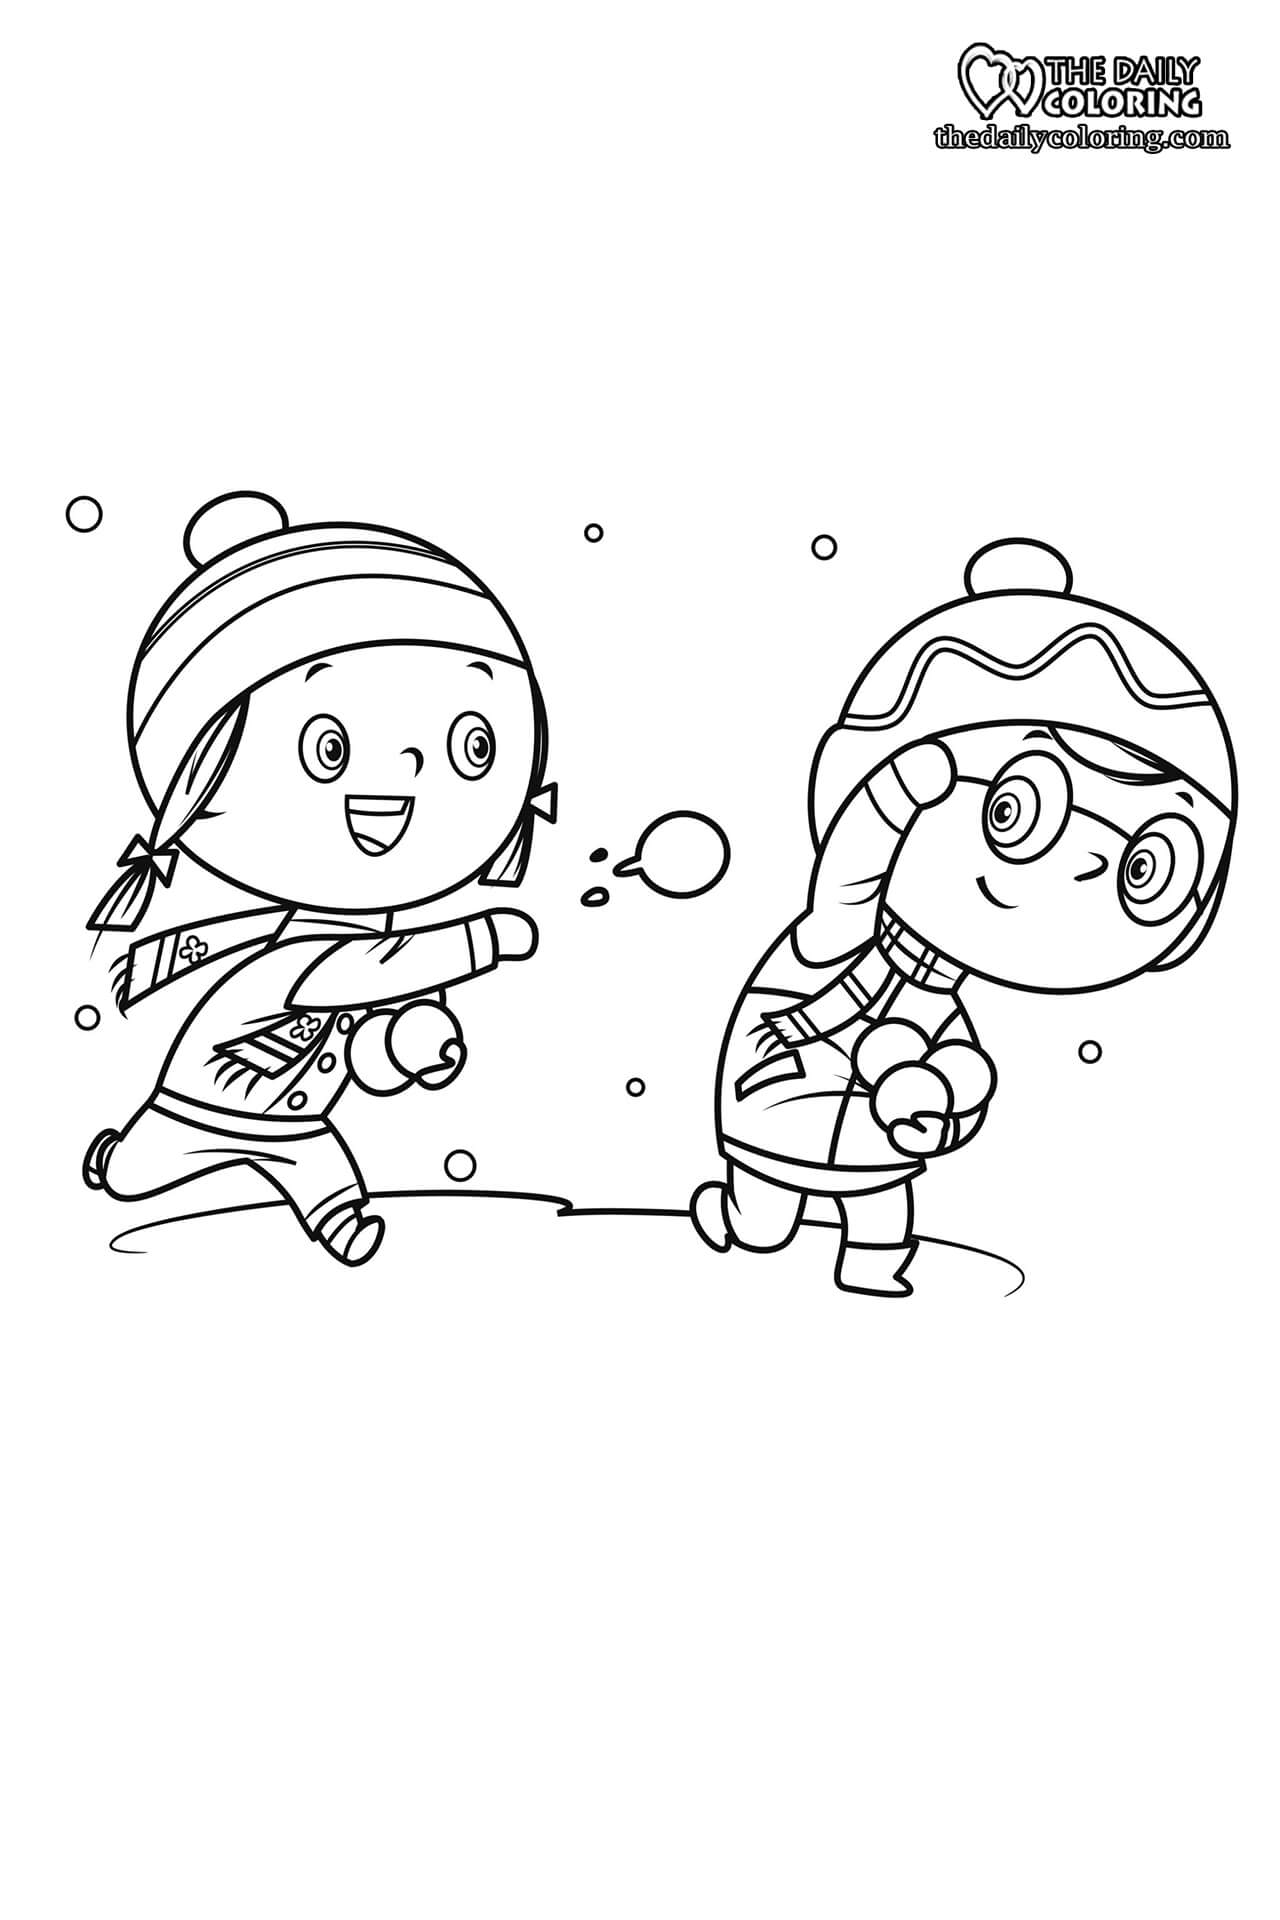 snow-ball-coloring-page